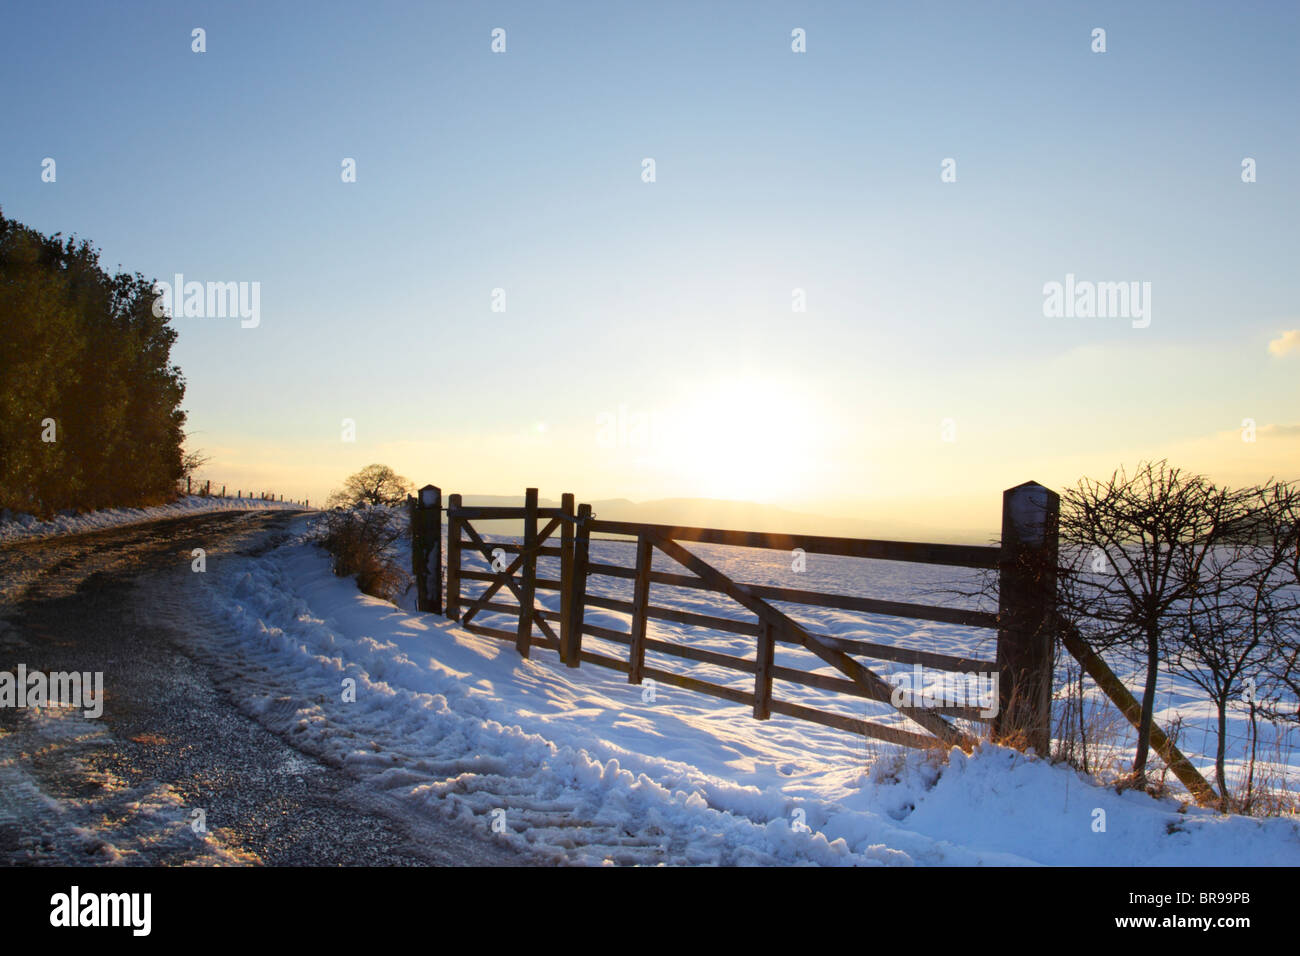 Backlit farm gate during winter with snow on the ground Stock Photo